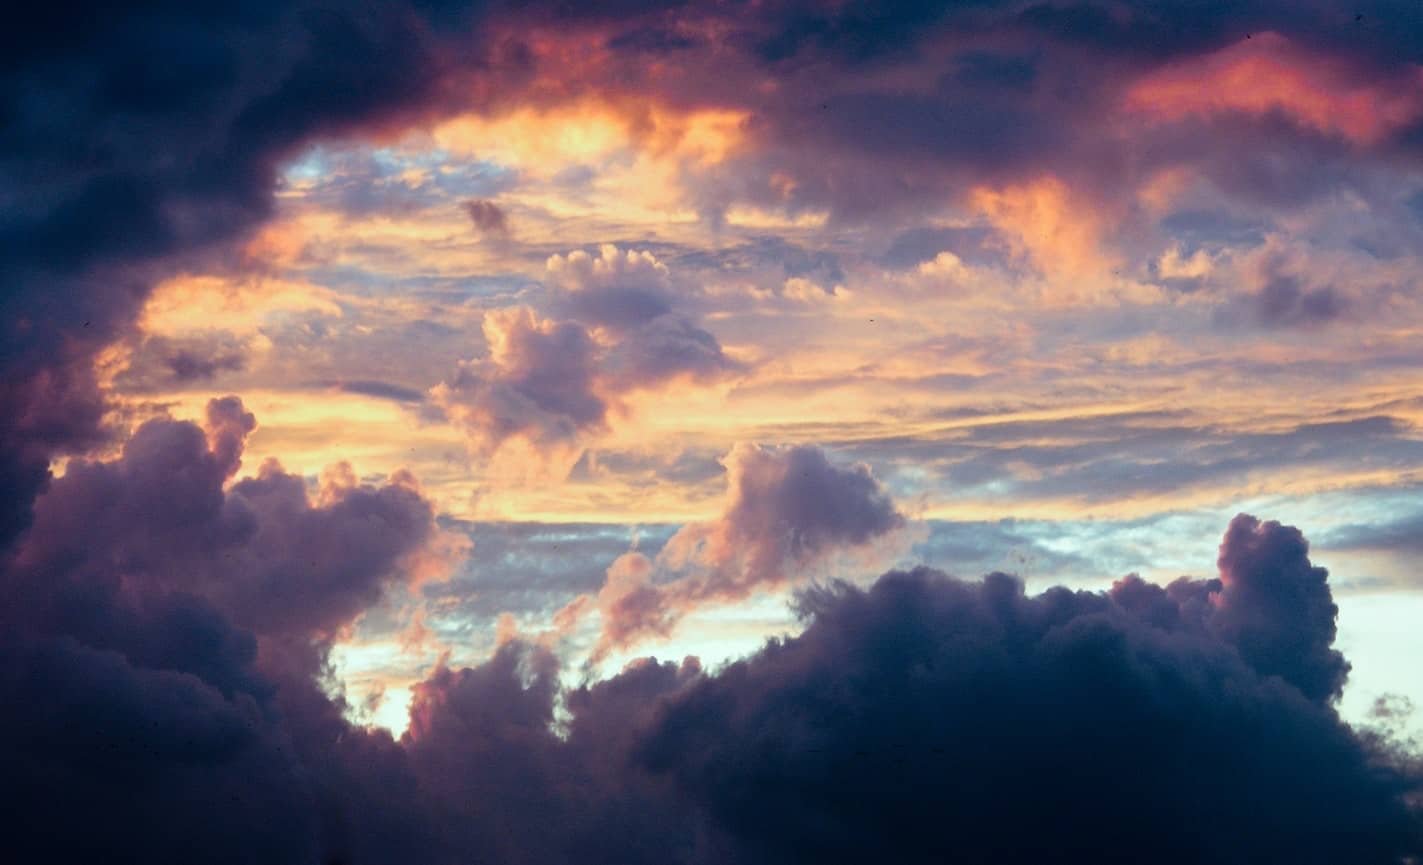 Cloudscapes are one of the types of landscape photography that is a unique niche